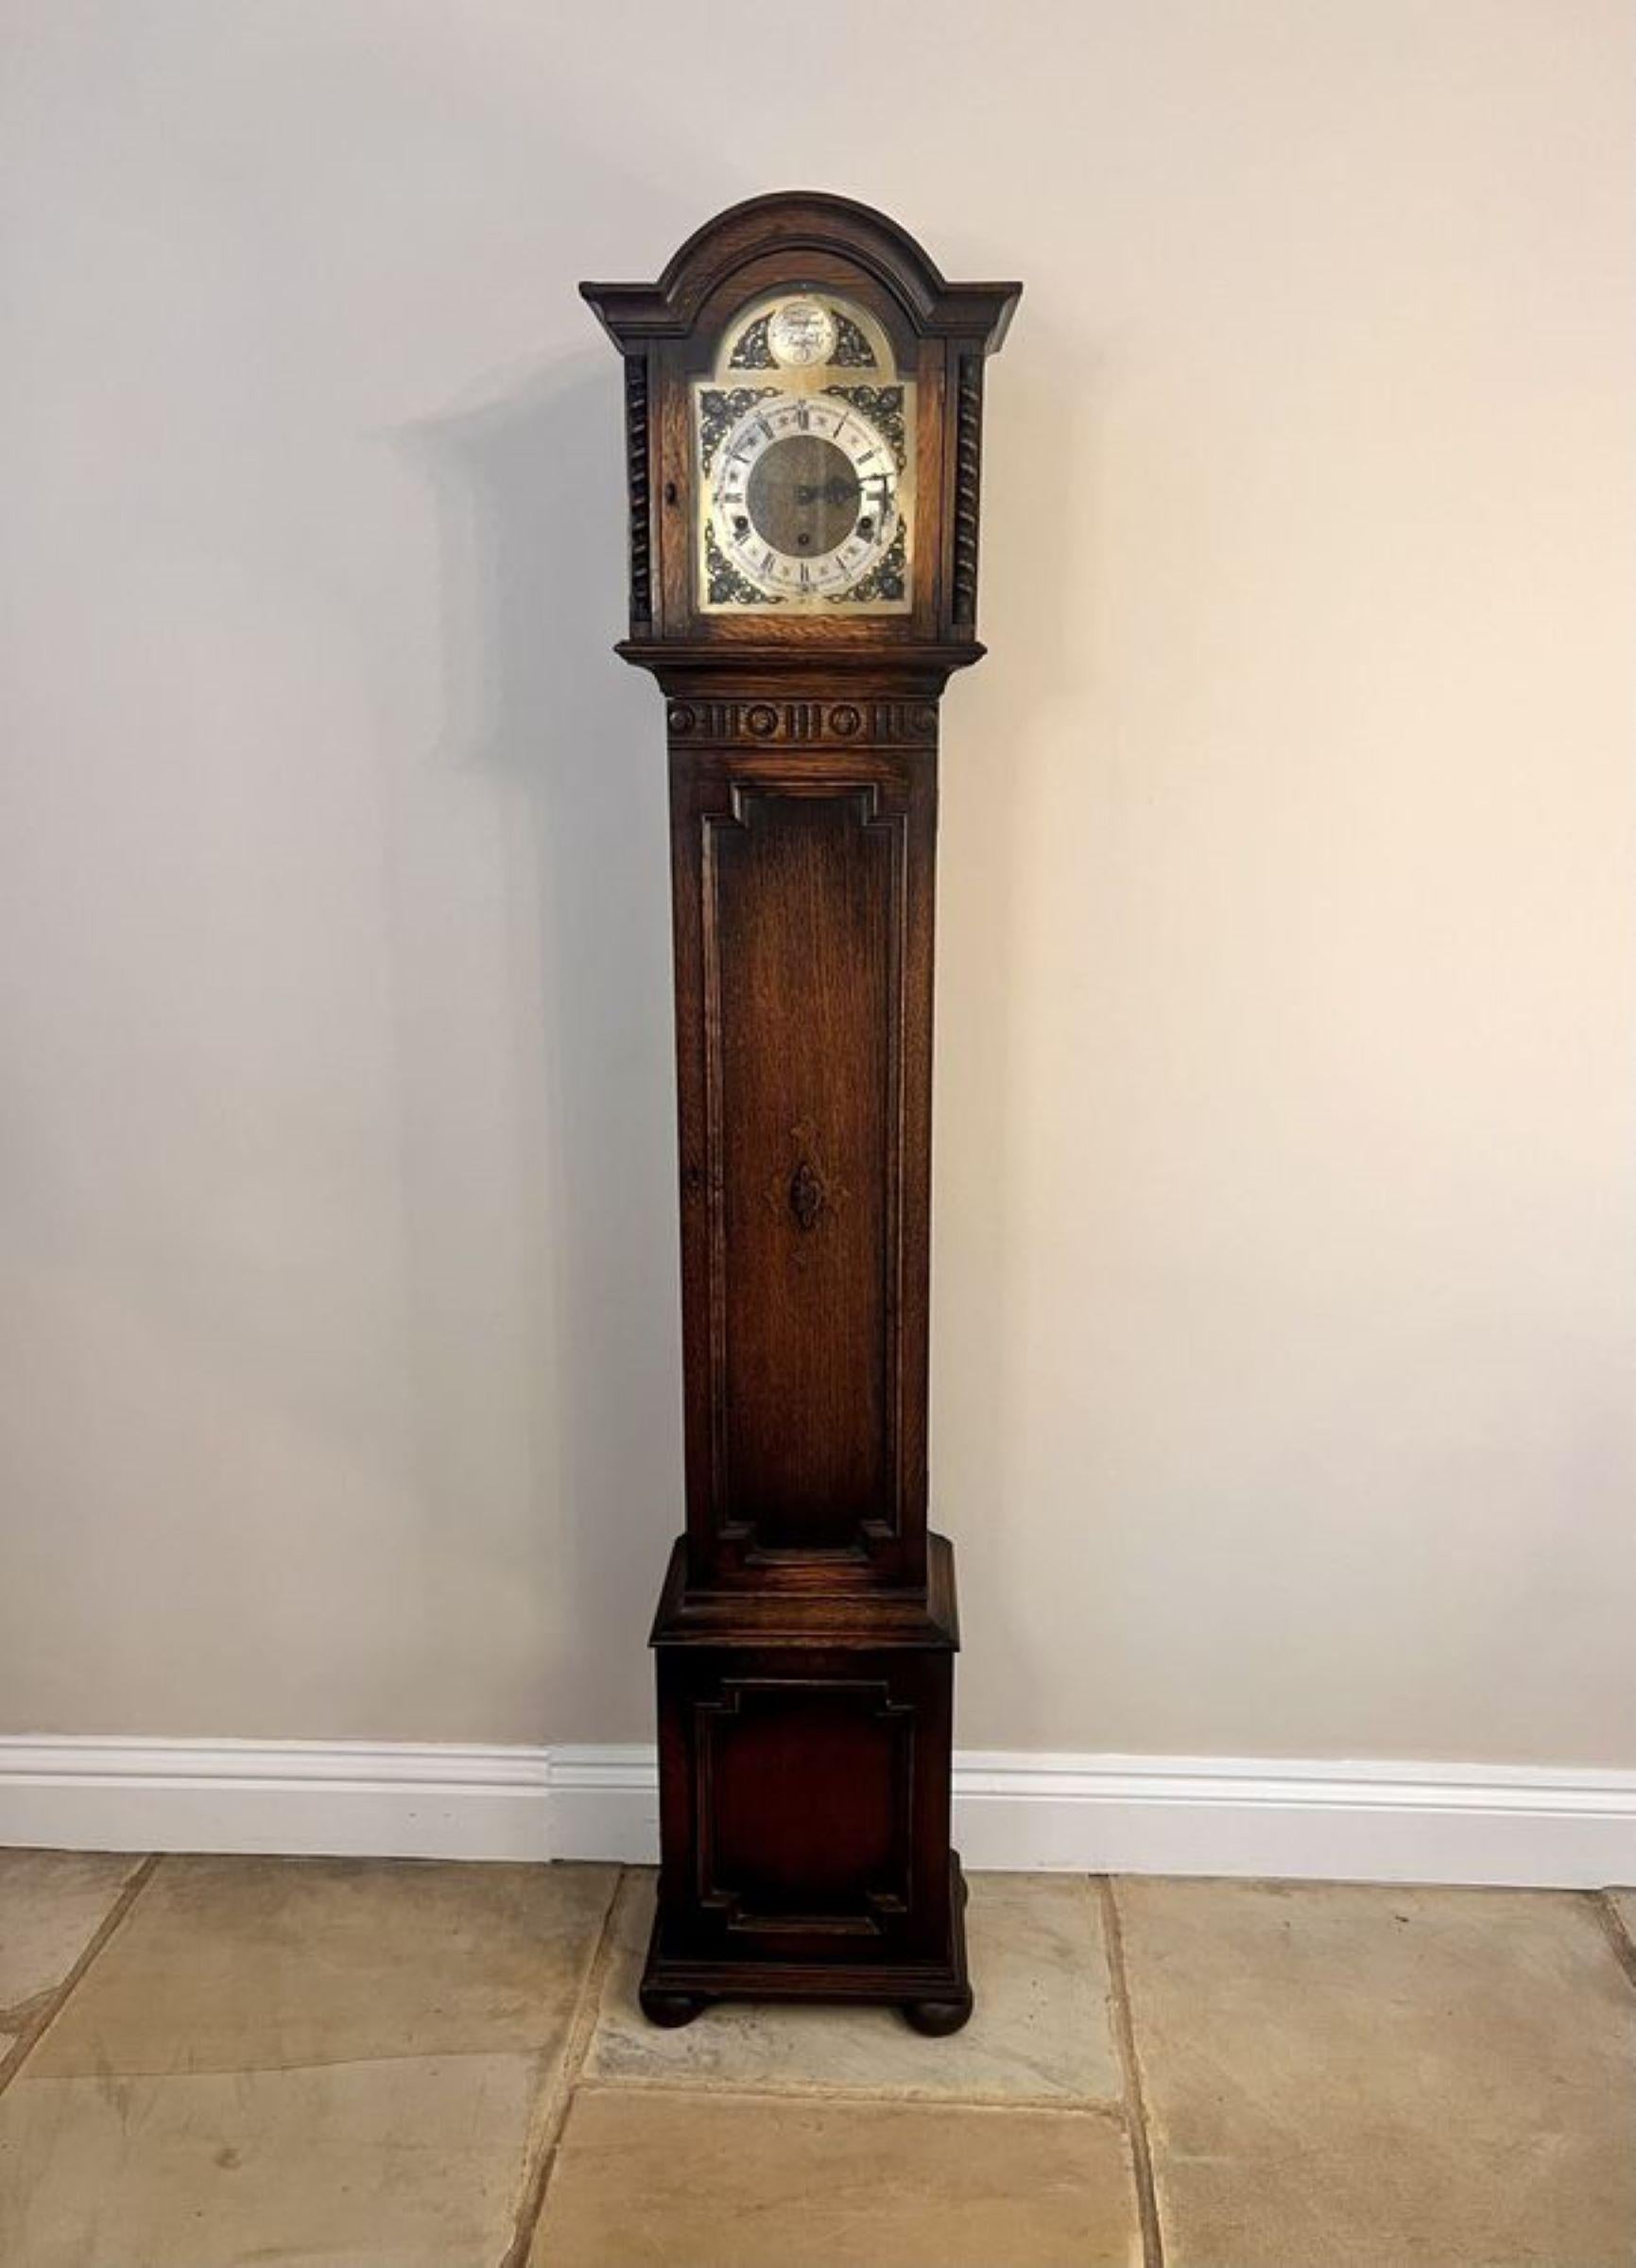 Fine Quality Antique Oak 8 Day Chiming Grandmother Clock having a quality oak case with carved mouldings and fine barley twist columns, with an ornate dial and a arched brass face with ornate spandrels and inscribed 'Tempus Fugit' with the original